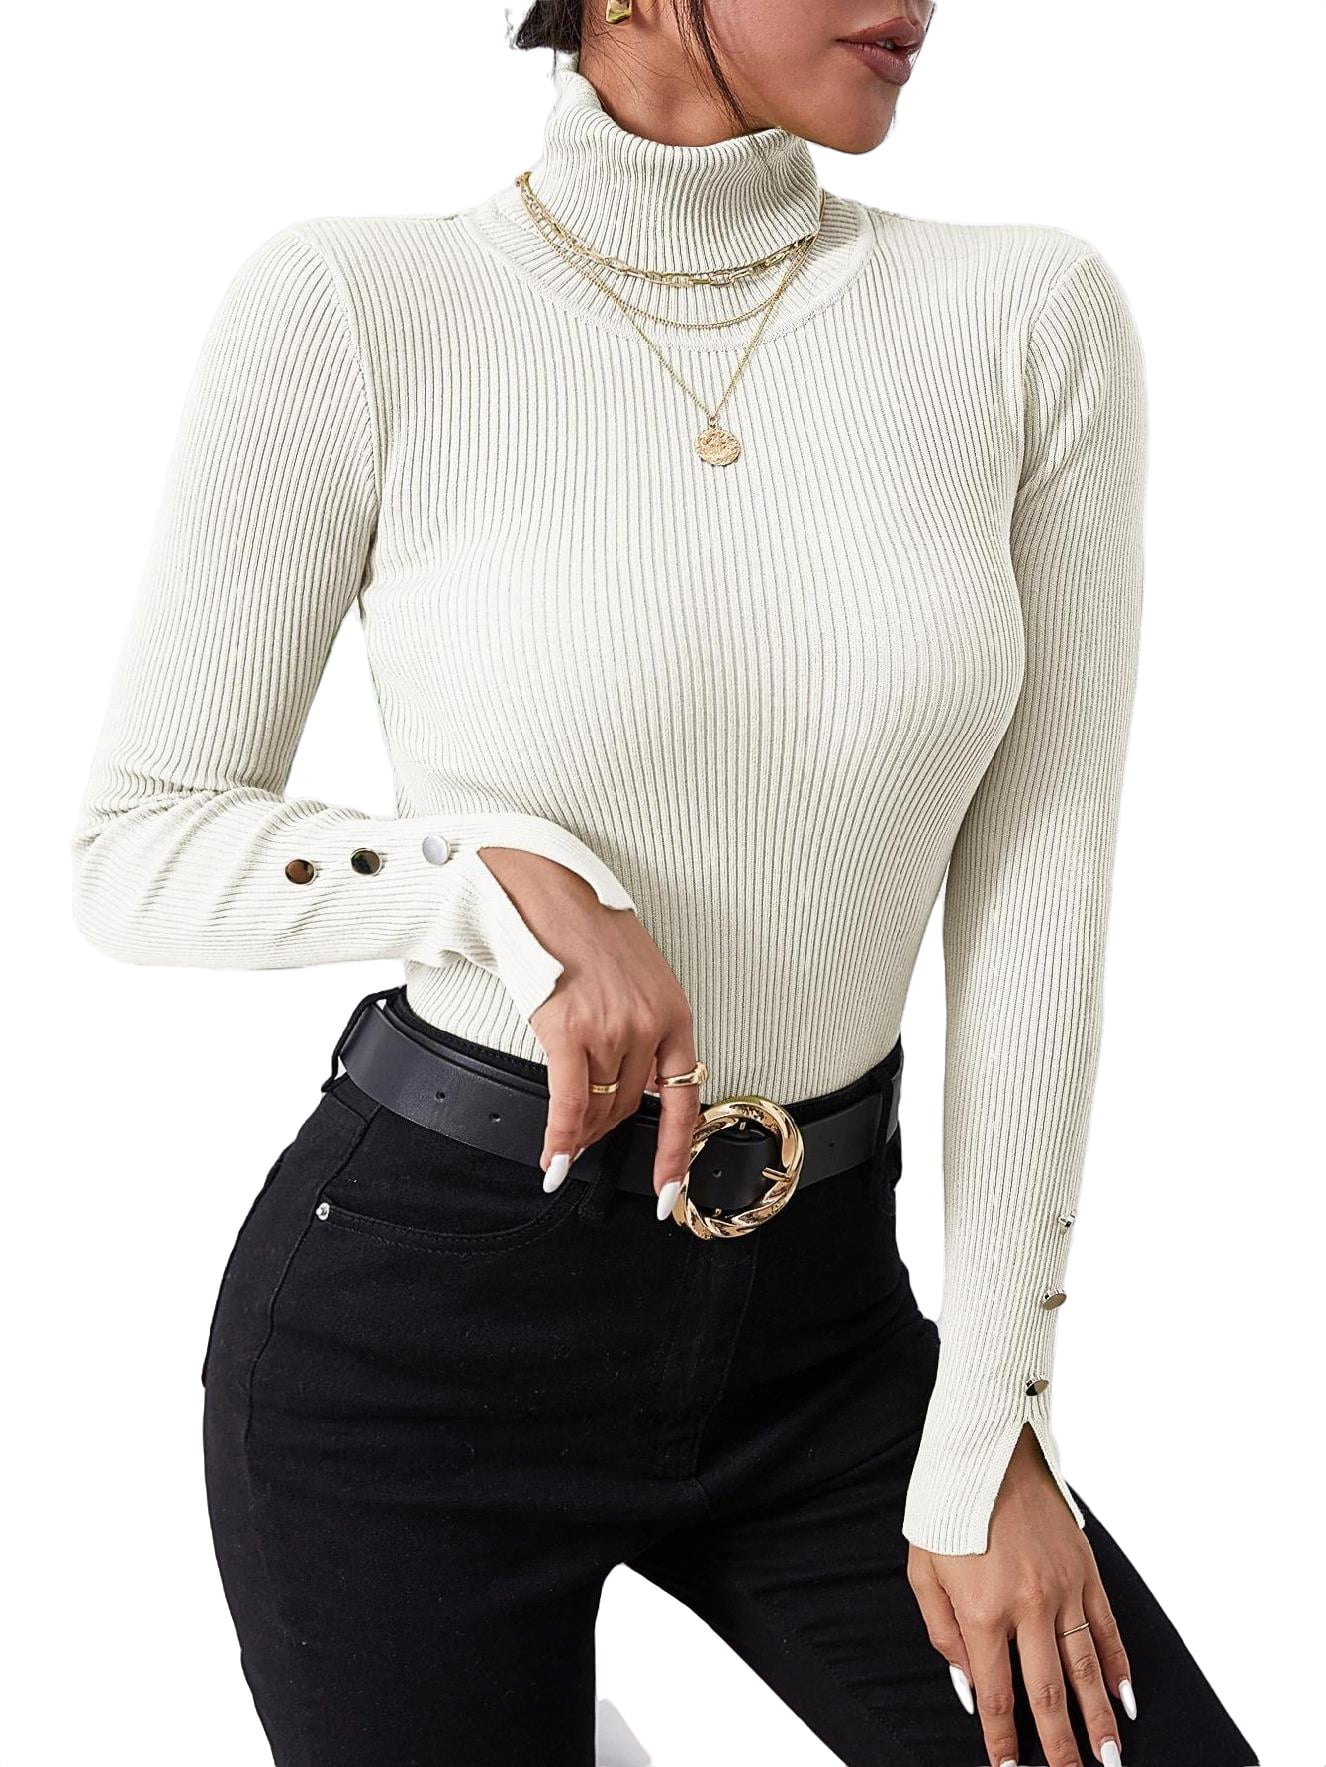 Womens Sweaters Casual Plain High Neck Pullovers White L - Walmart.com